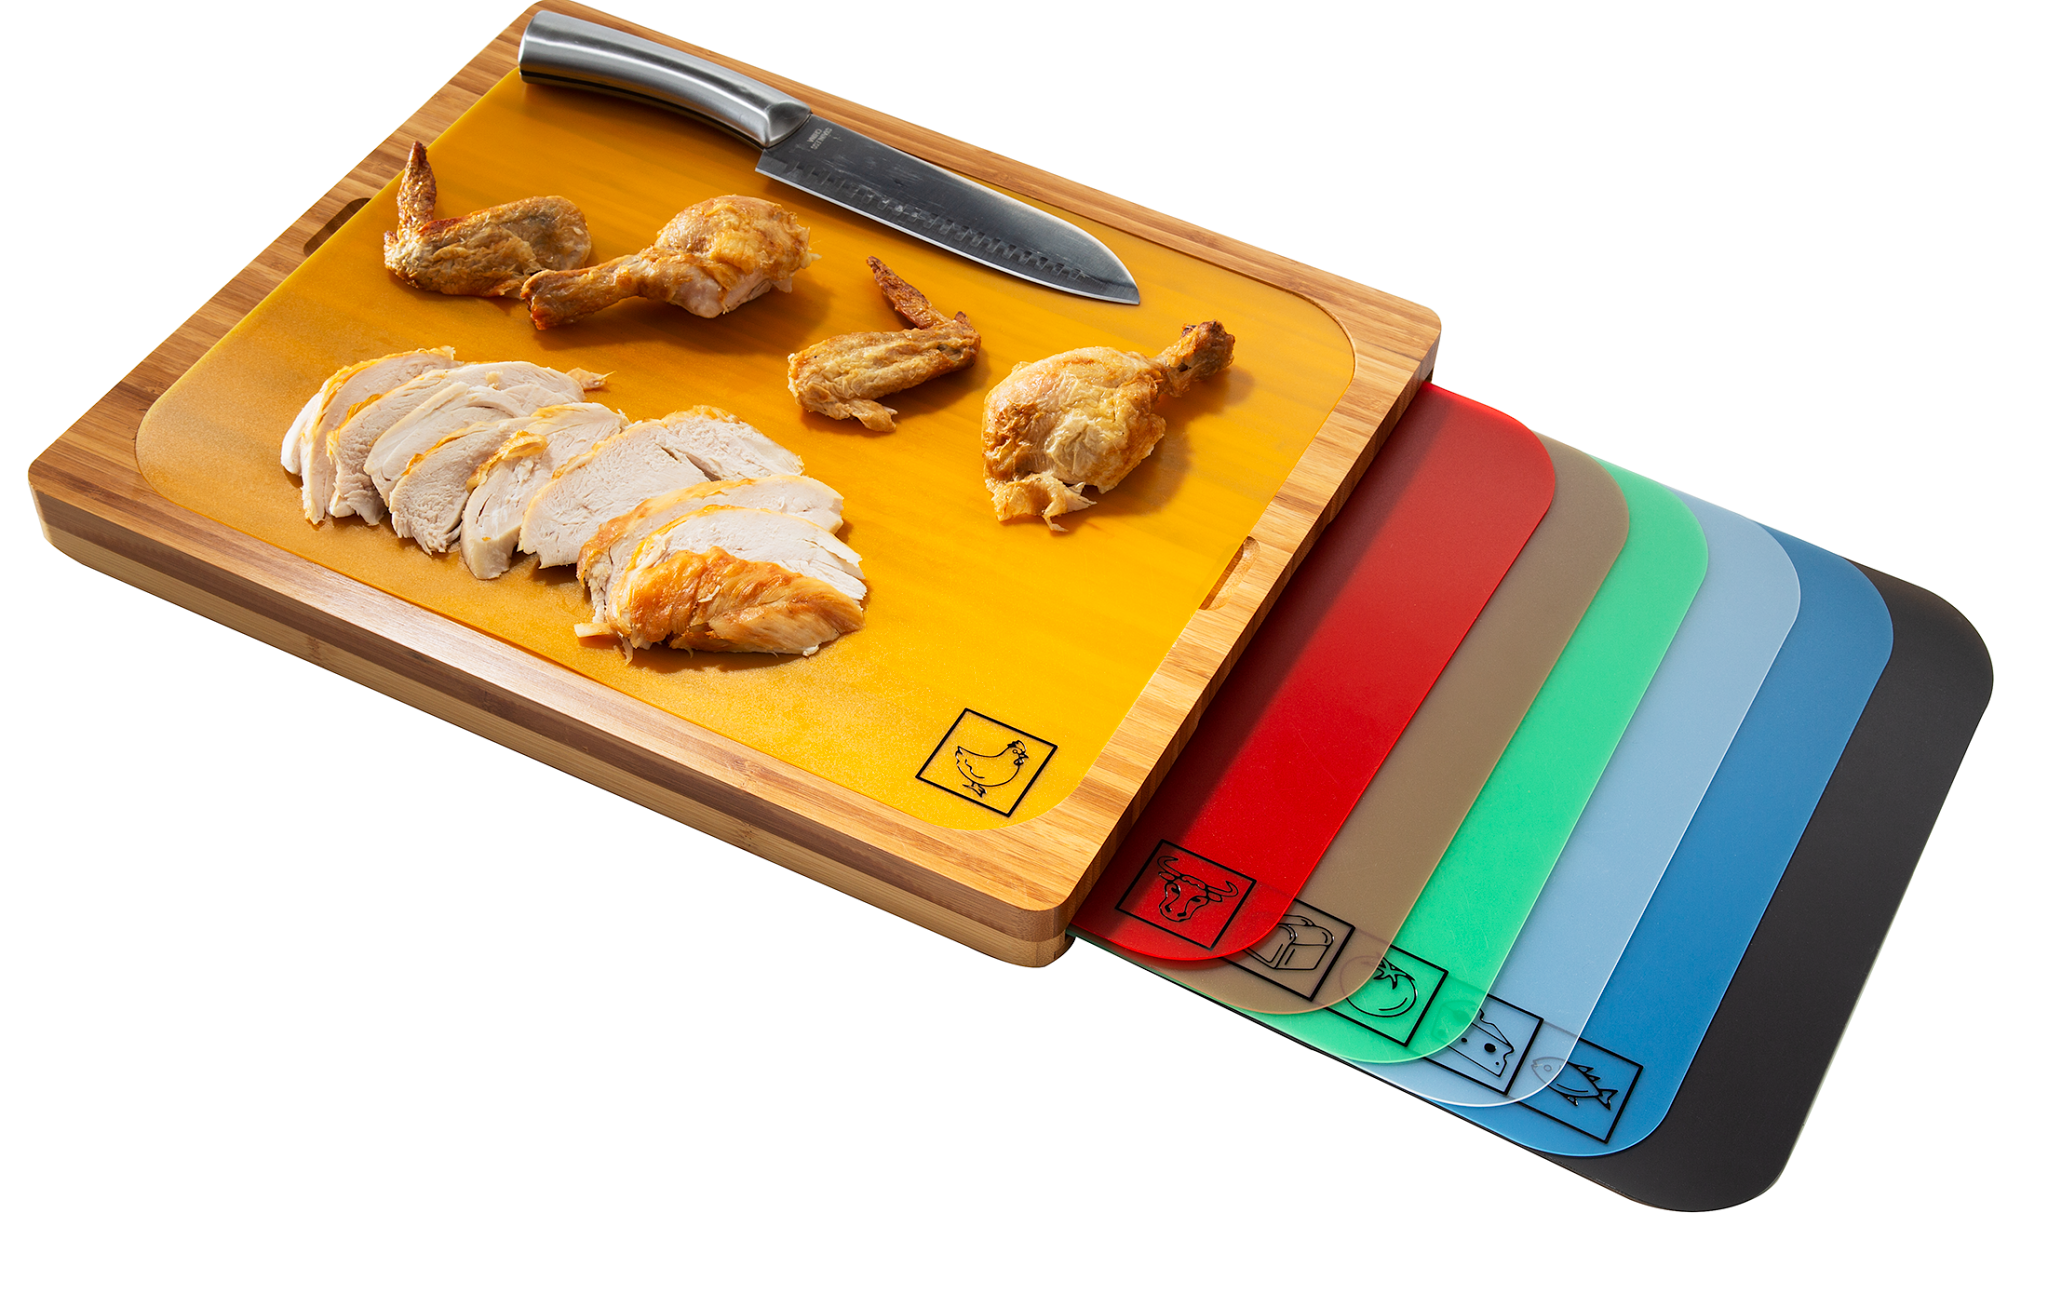 Product photo showing bamboo cutting board with 7 color-coded cutting mats, with the poultry mat being used on the bamboo cutting board to slice chicken 